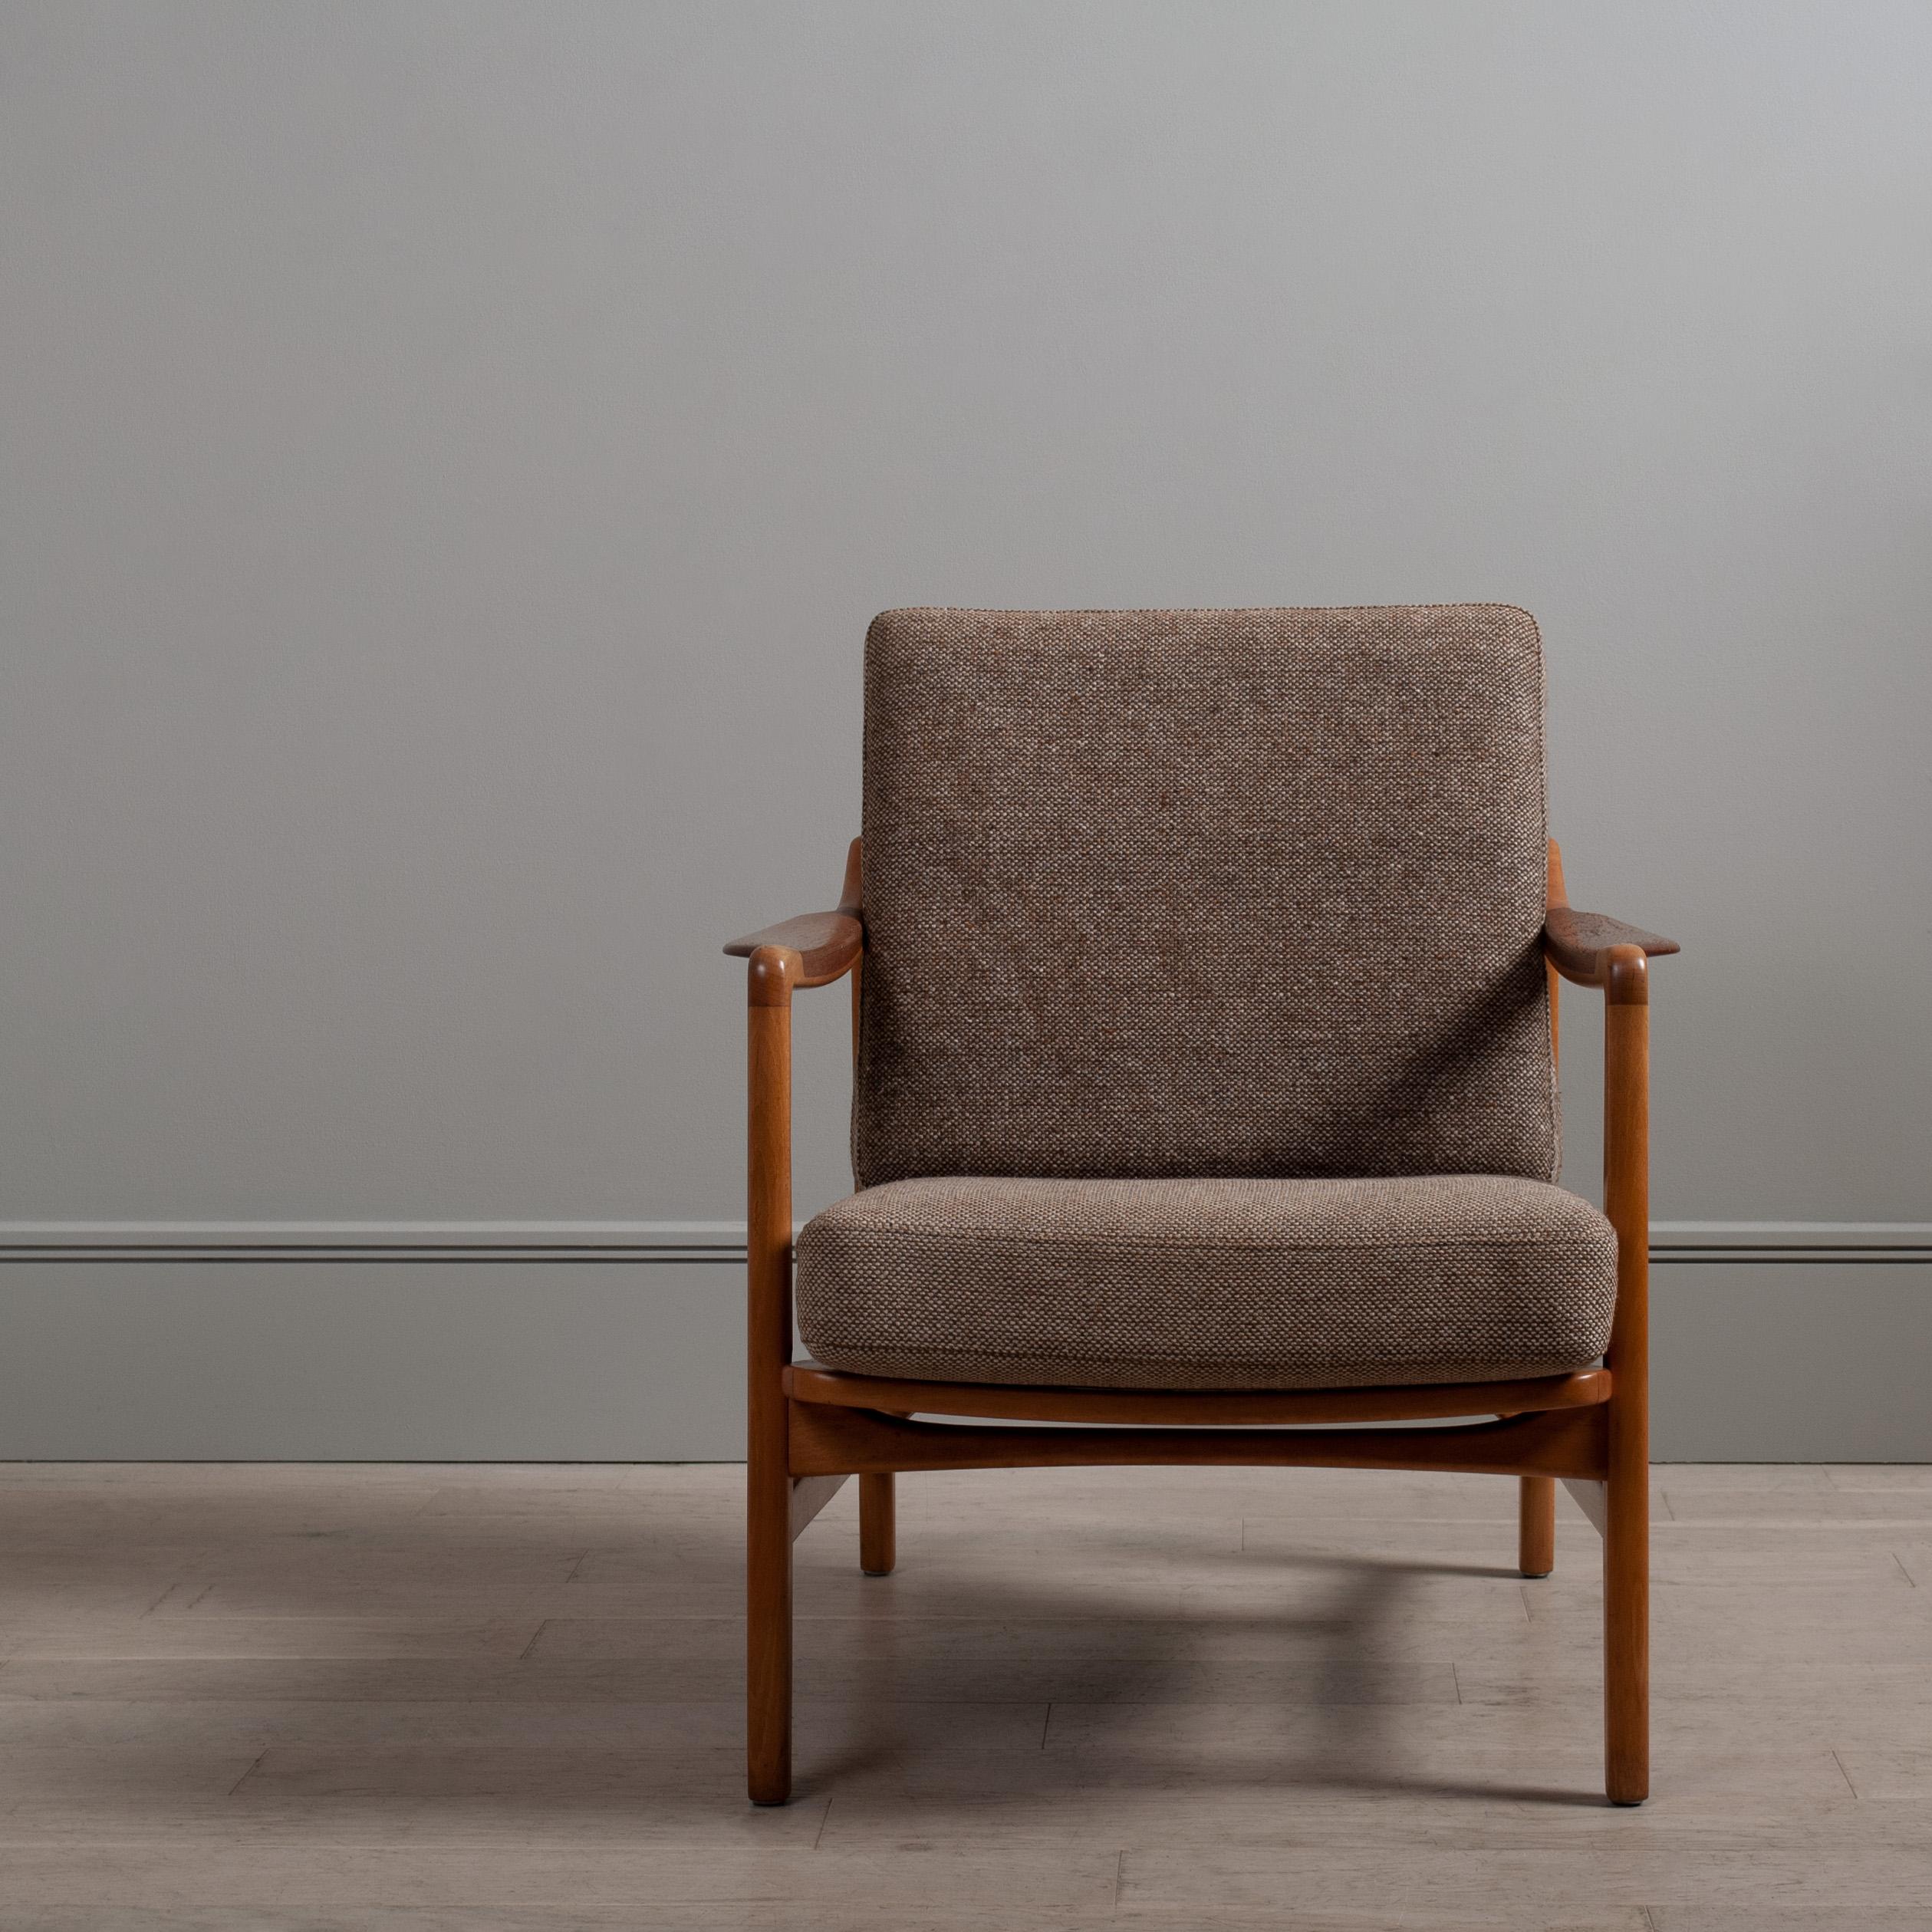 A superbly designed lounge chair by Tove & Edvard Kindt Larsen. Model 117 constructed from European beech with inset teak armrests. Price includes reupholstery in fabric colour of choice from the Isle Mill Fabric - Leather upholstery for small